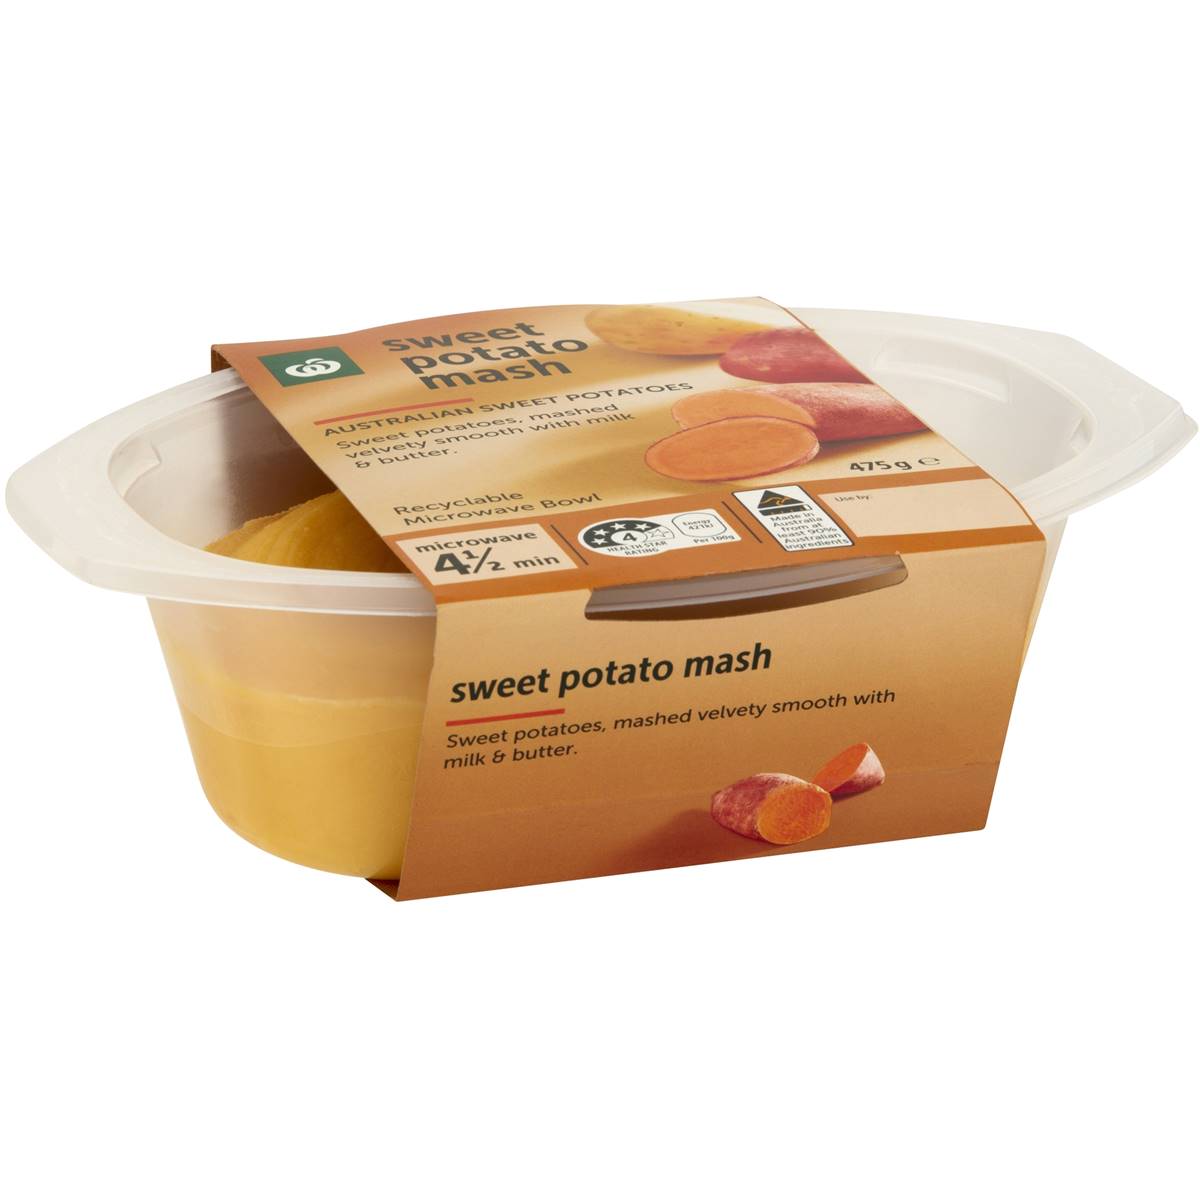 Calories in Woolworths Sweet Potato Mash